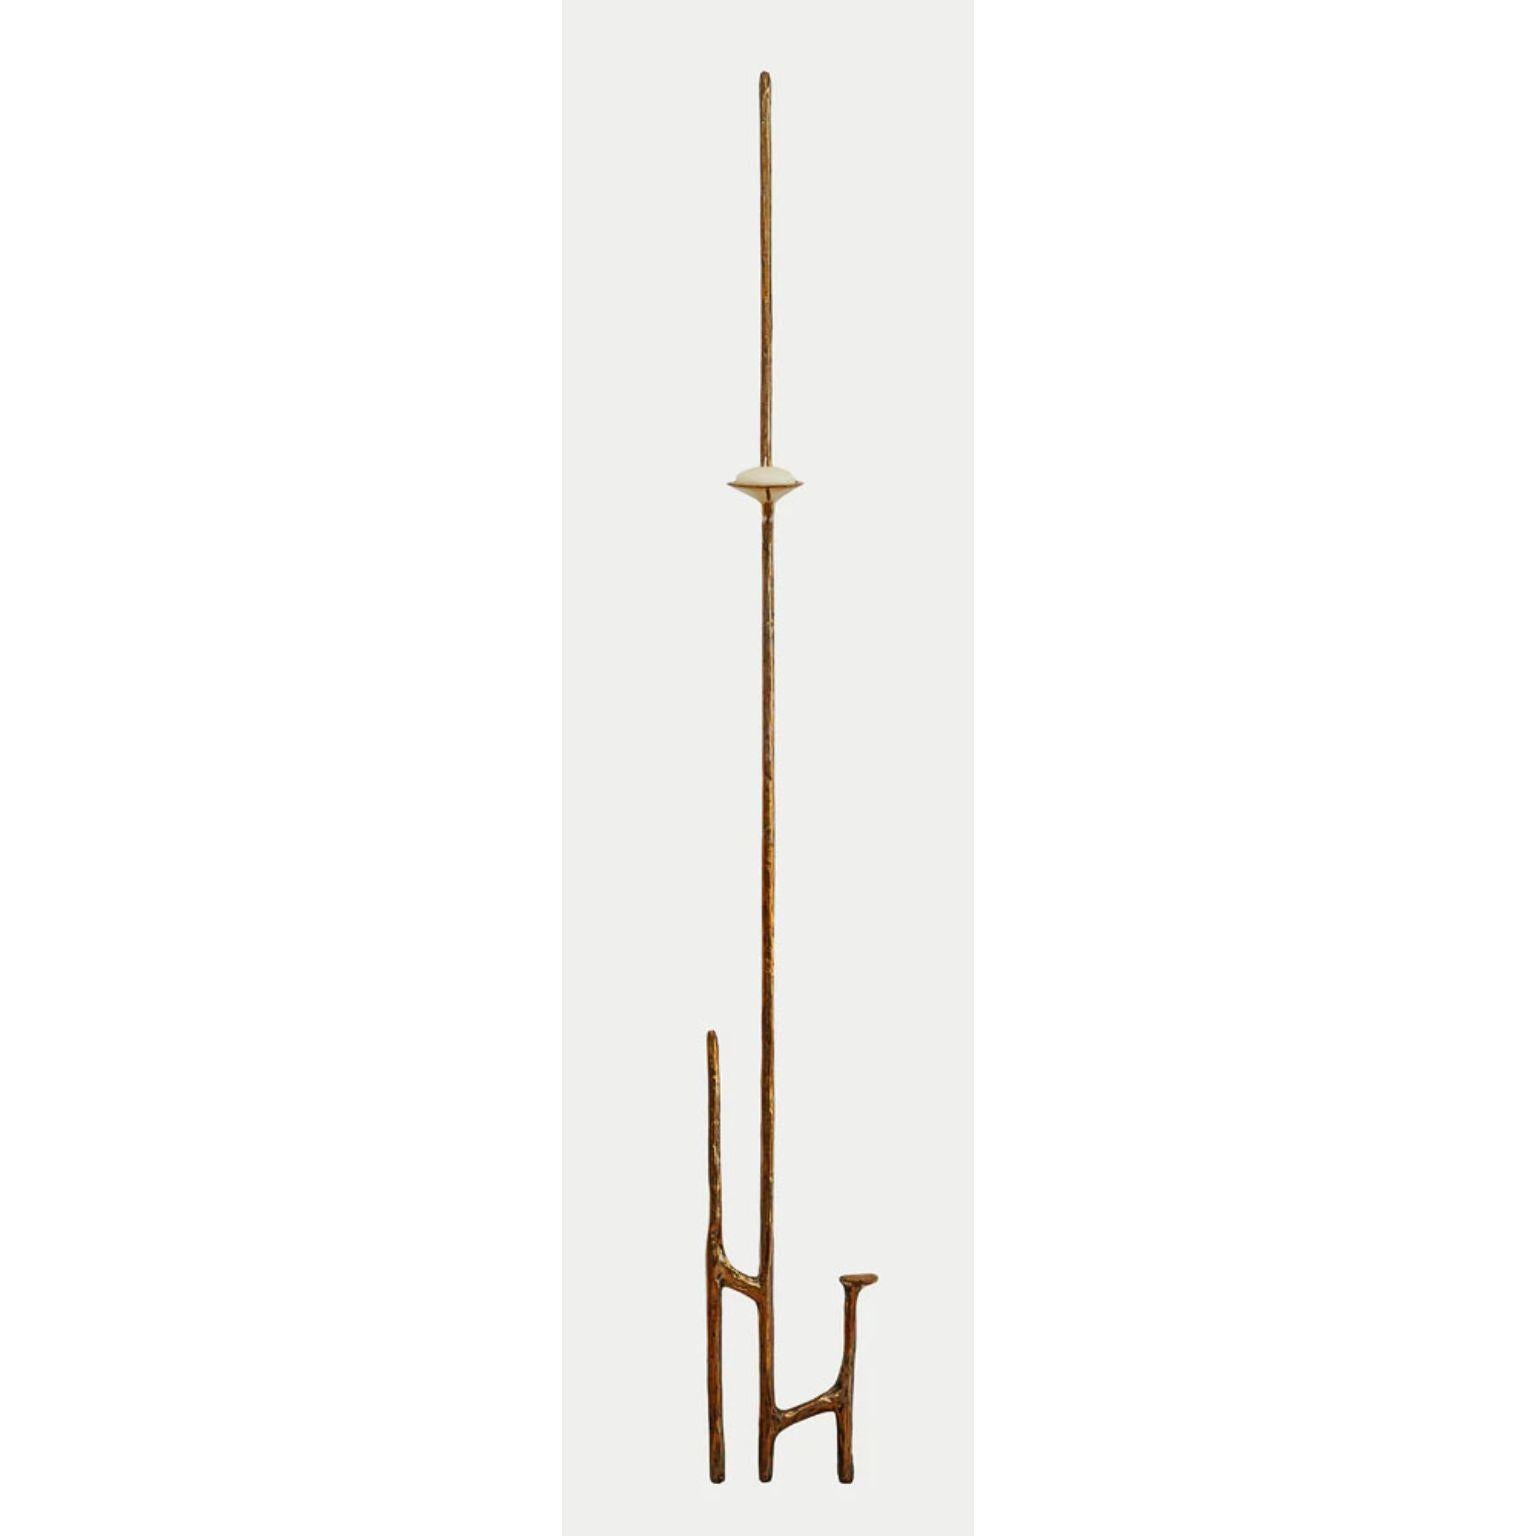 Polished Bronze Leaning Candlestick by Mary Brōgger
Dimensions: W 33 cm x D 5 cm x H 196 cm.
Materials: polished bronze.
Also available in other finishes and dimensions.

Mary Brōgger is an internationally recognized artist whose diverse practice